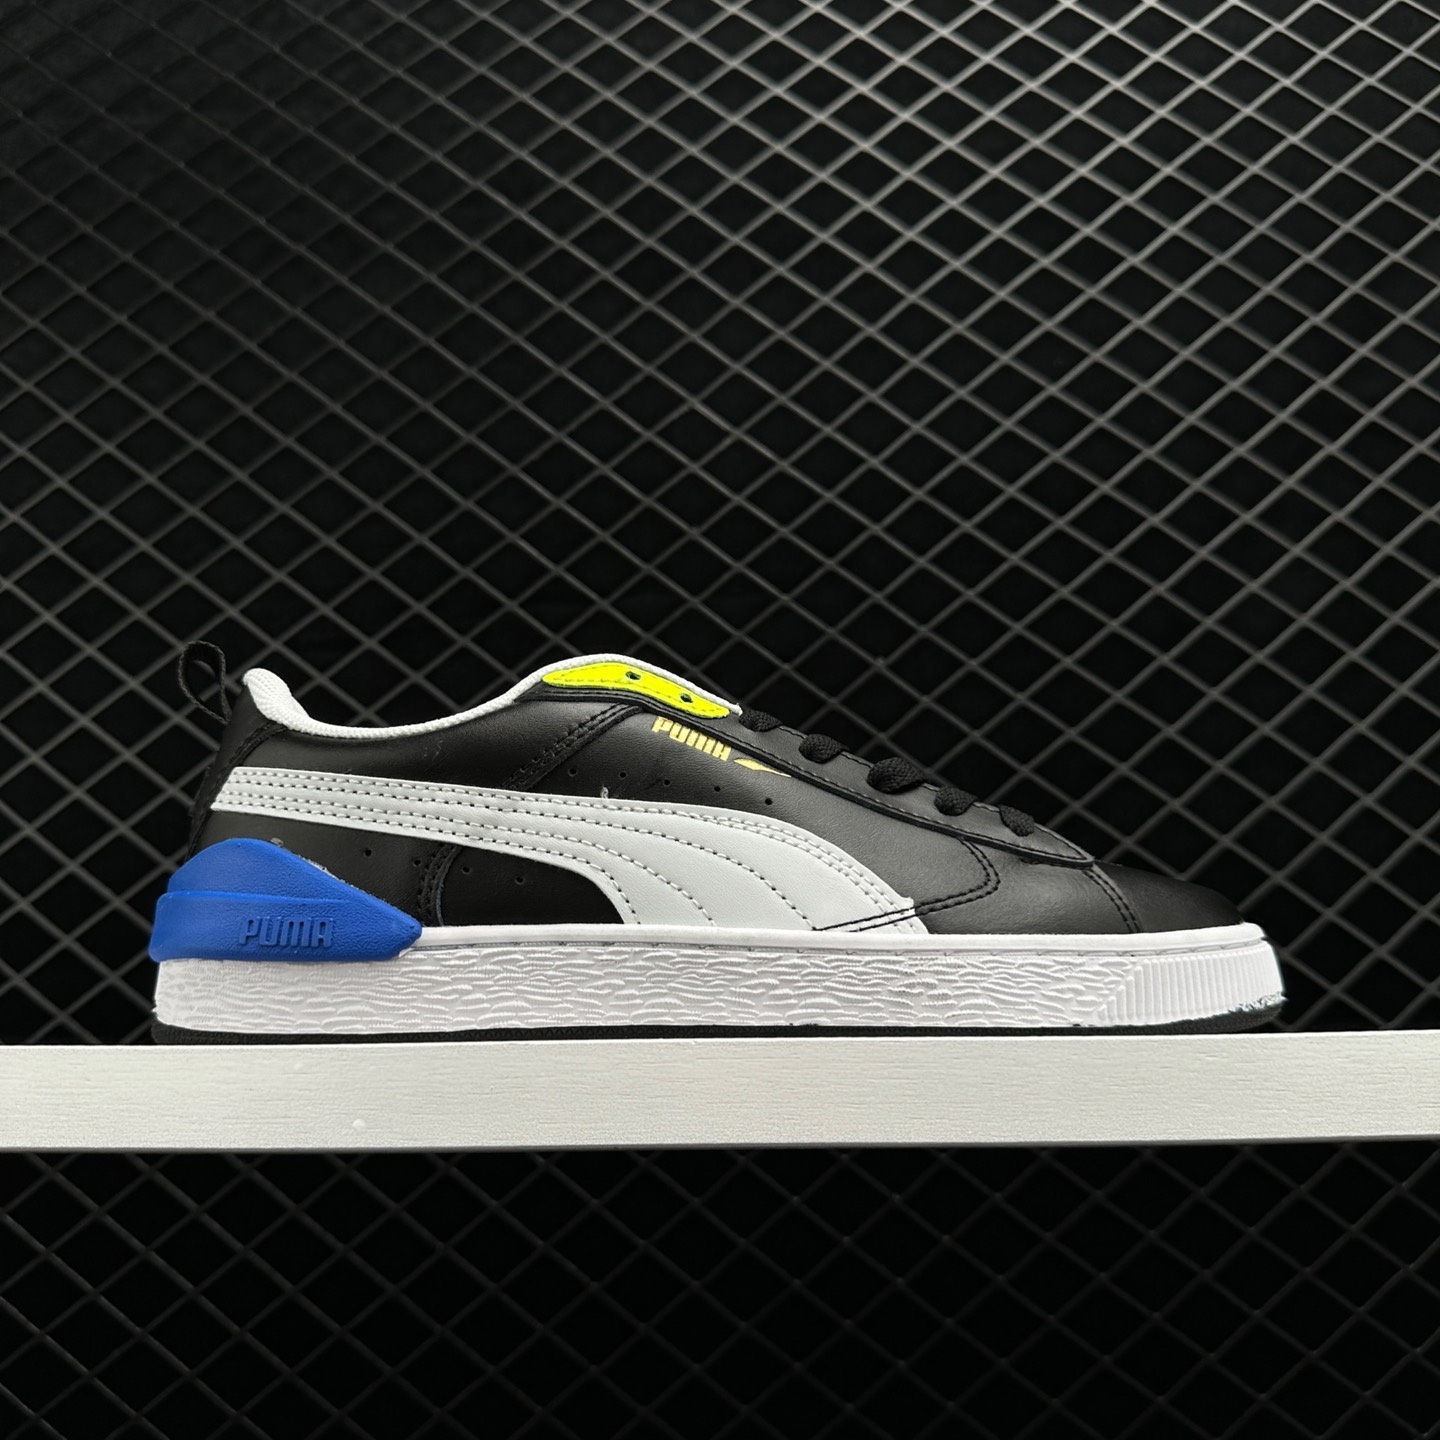 Puma Suede Bloc 'Black Ice Flow' 380705 05 - Stylish and Sleek Footwear for All-Day Comfort